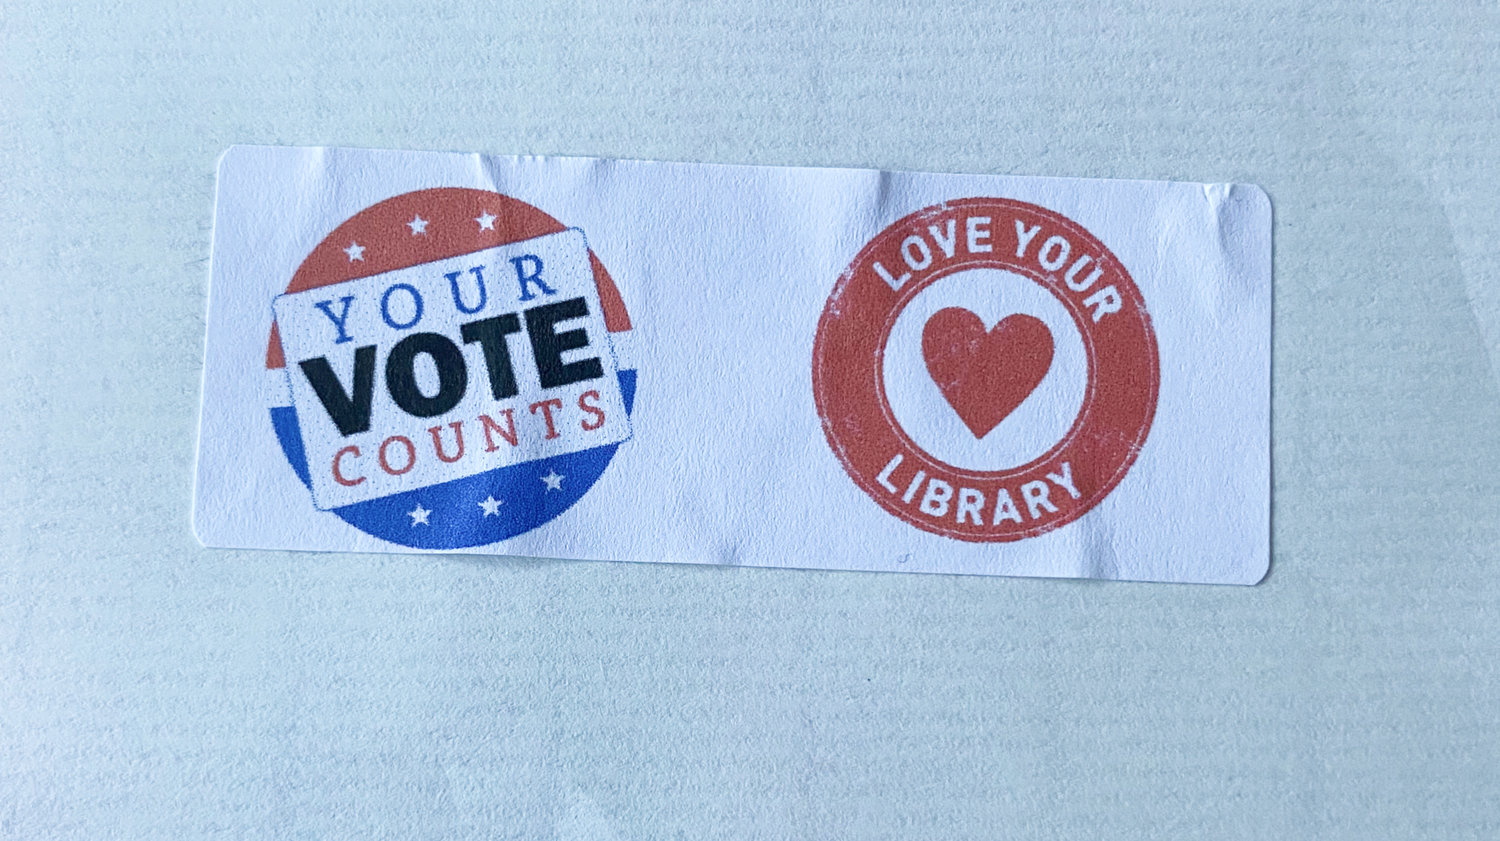 Local residents address the Vernon-Verona-Sherrill School Board, asking board members not to accept the Sherrill-Kenwood Free Library's budget vote amid accusations of electioneering. Pictured is the sticker in question